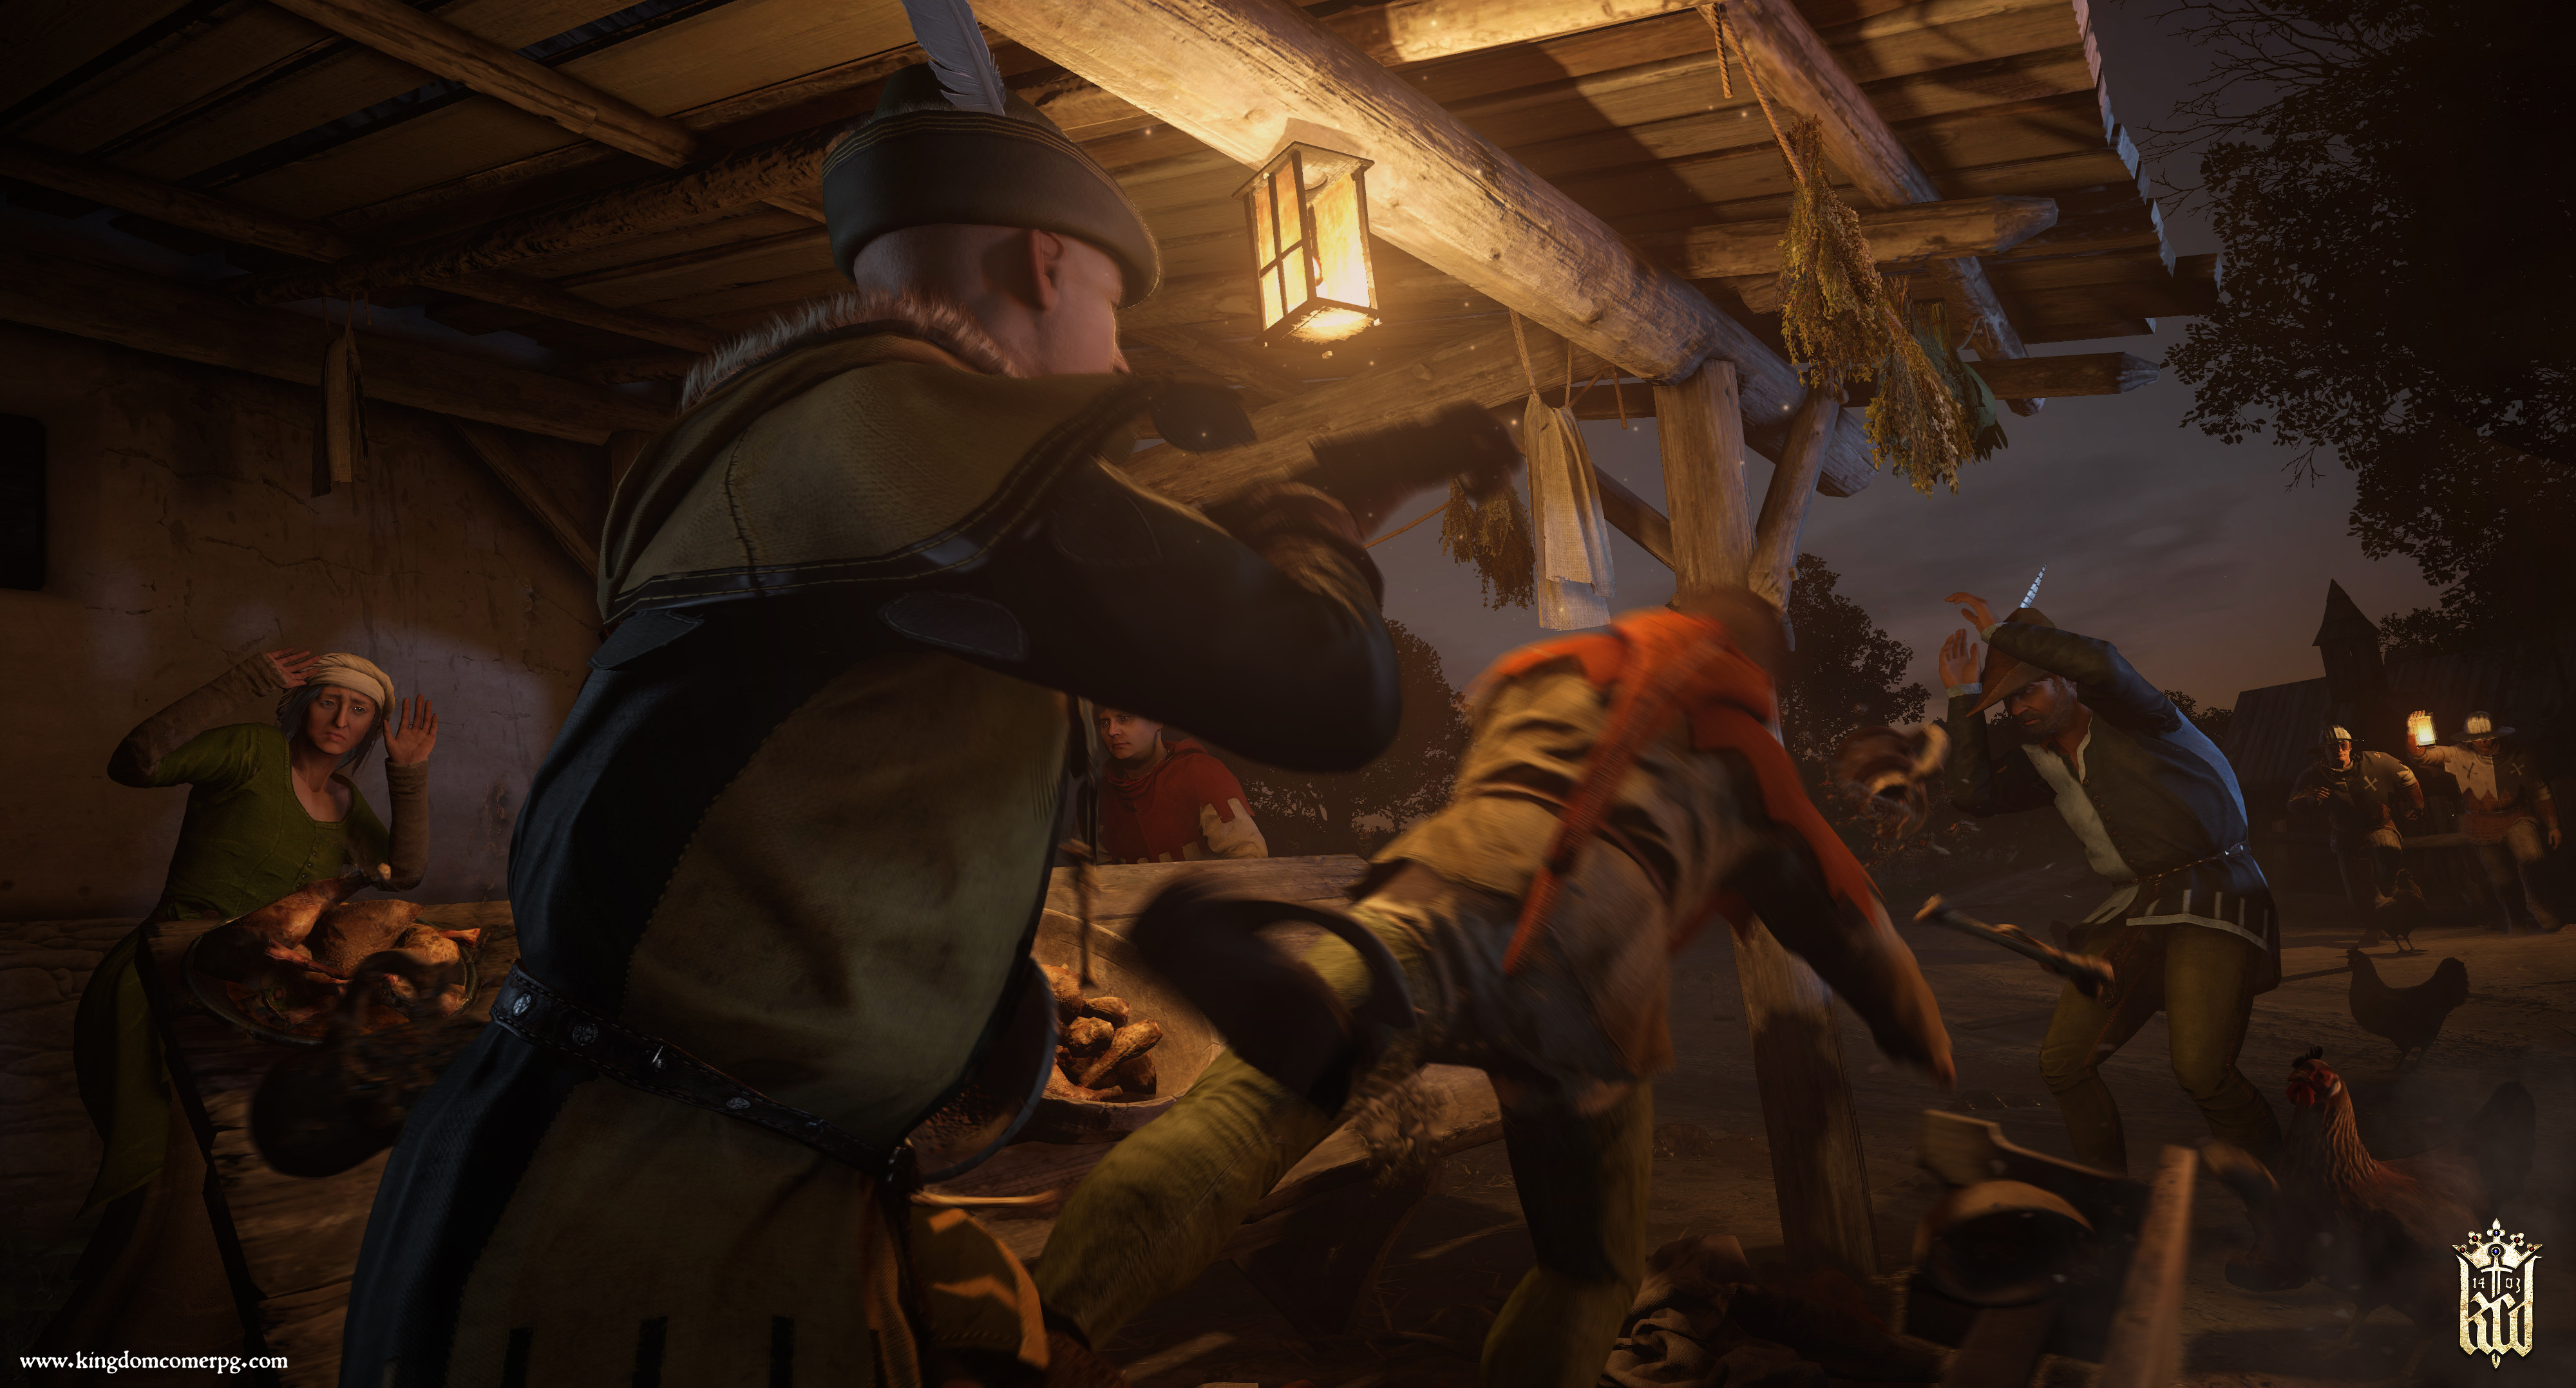 Kingdom Come: Deliverance Wallpapers, Pictures, Images